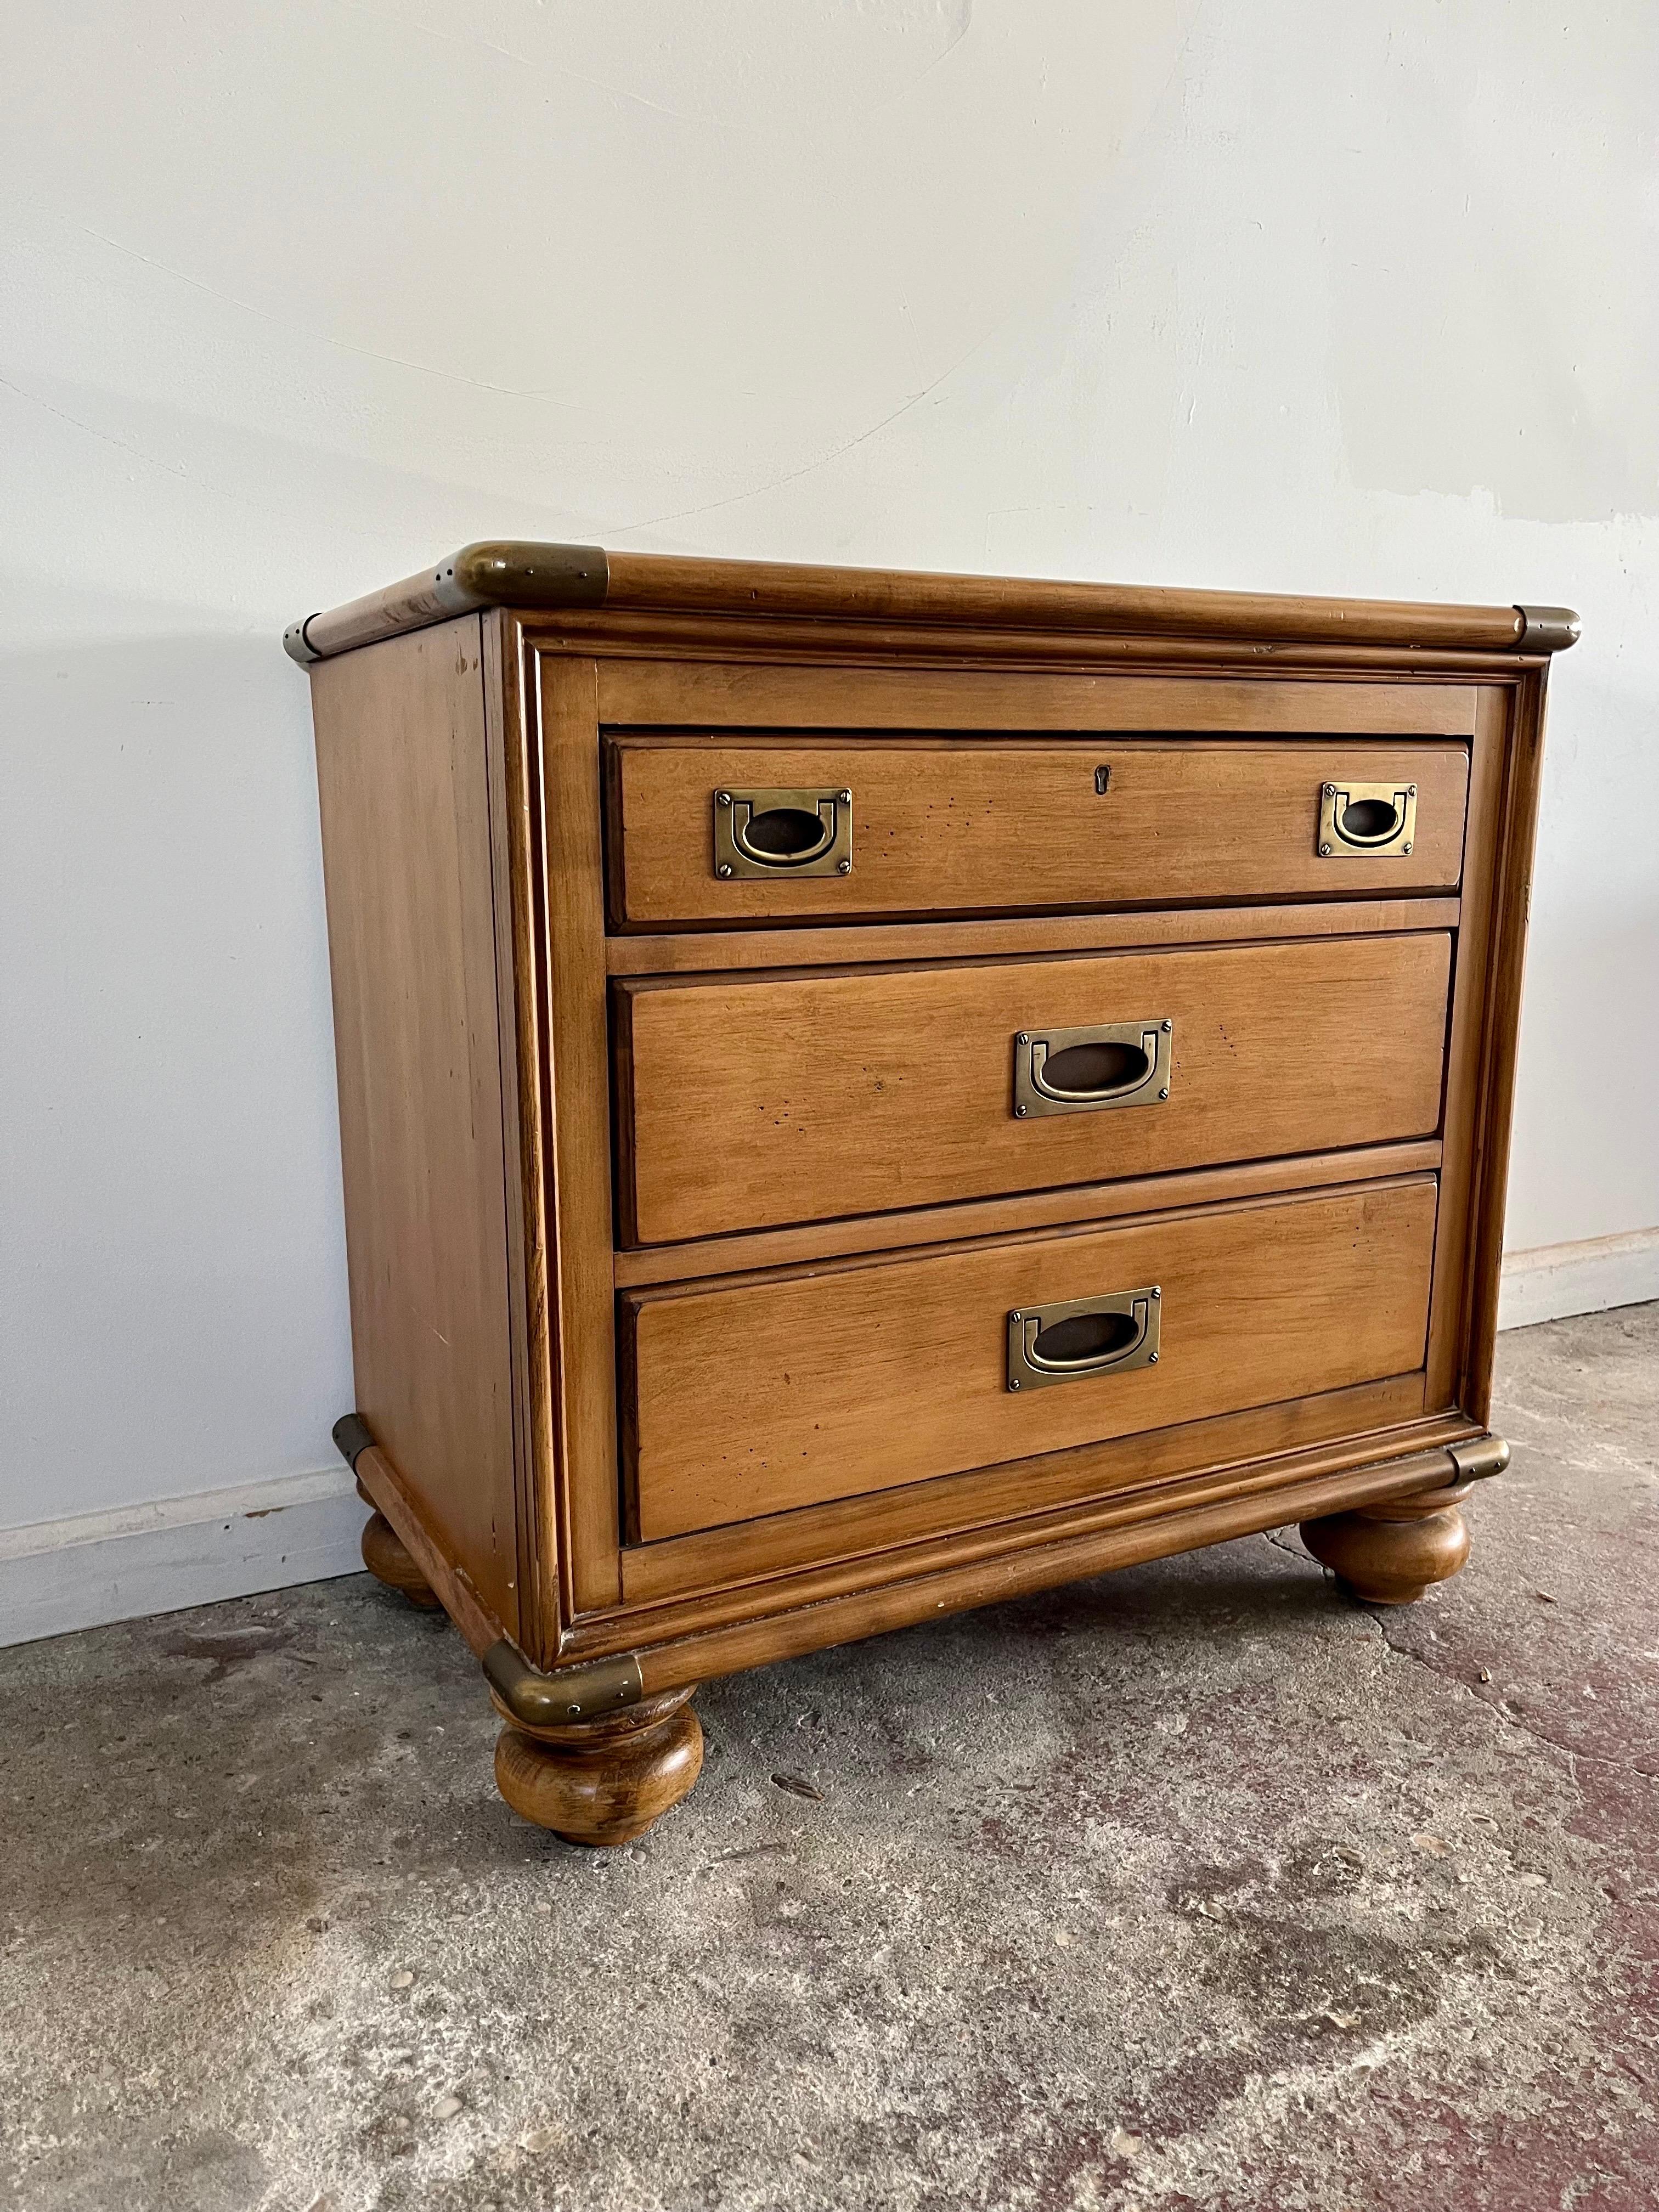 A light stained wood nightstand with brass accents by Lexington Furniture Nautica Home Collection. The chest features three drawers down the front each with brass handles, Brass capped corners and bun feet. The inside of the top right drawer reads